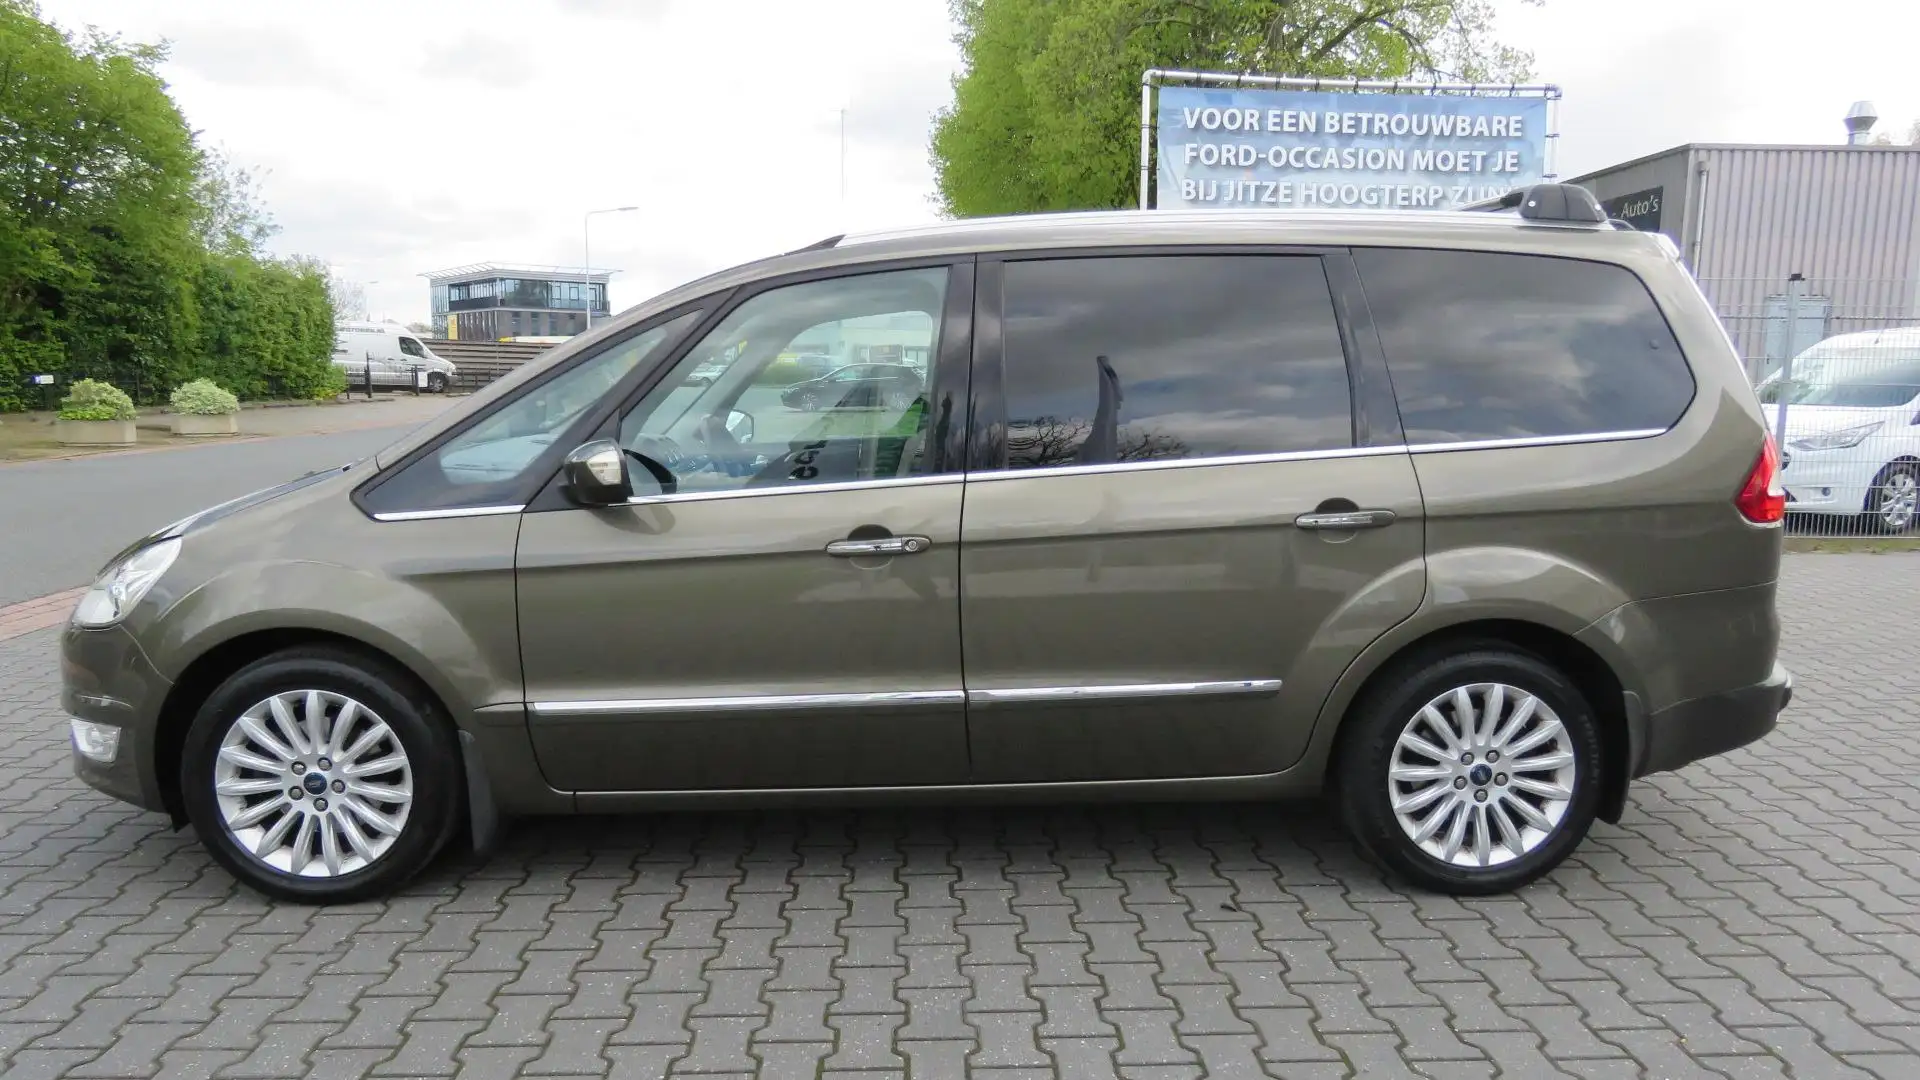 Ford Galaxy 2.0 Titanium 7 pers., Navigatie, PDC, Cruise, deal Green - 2